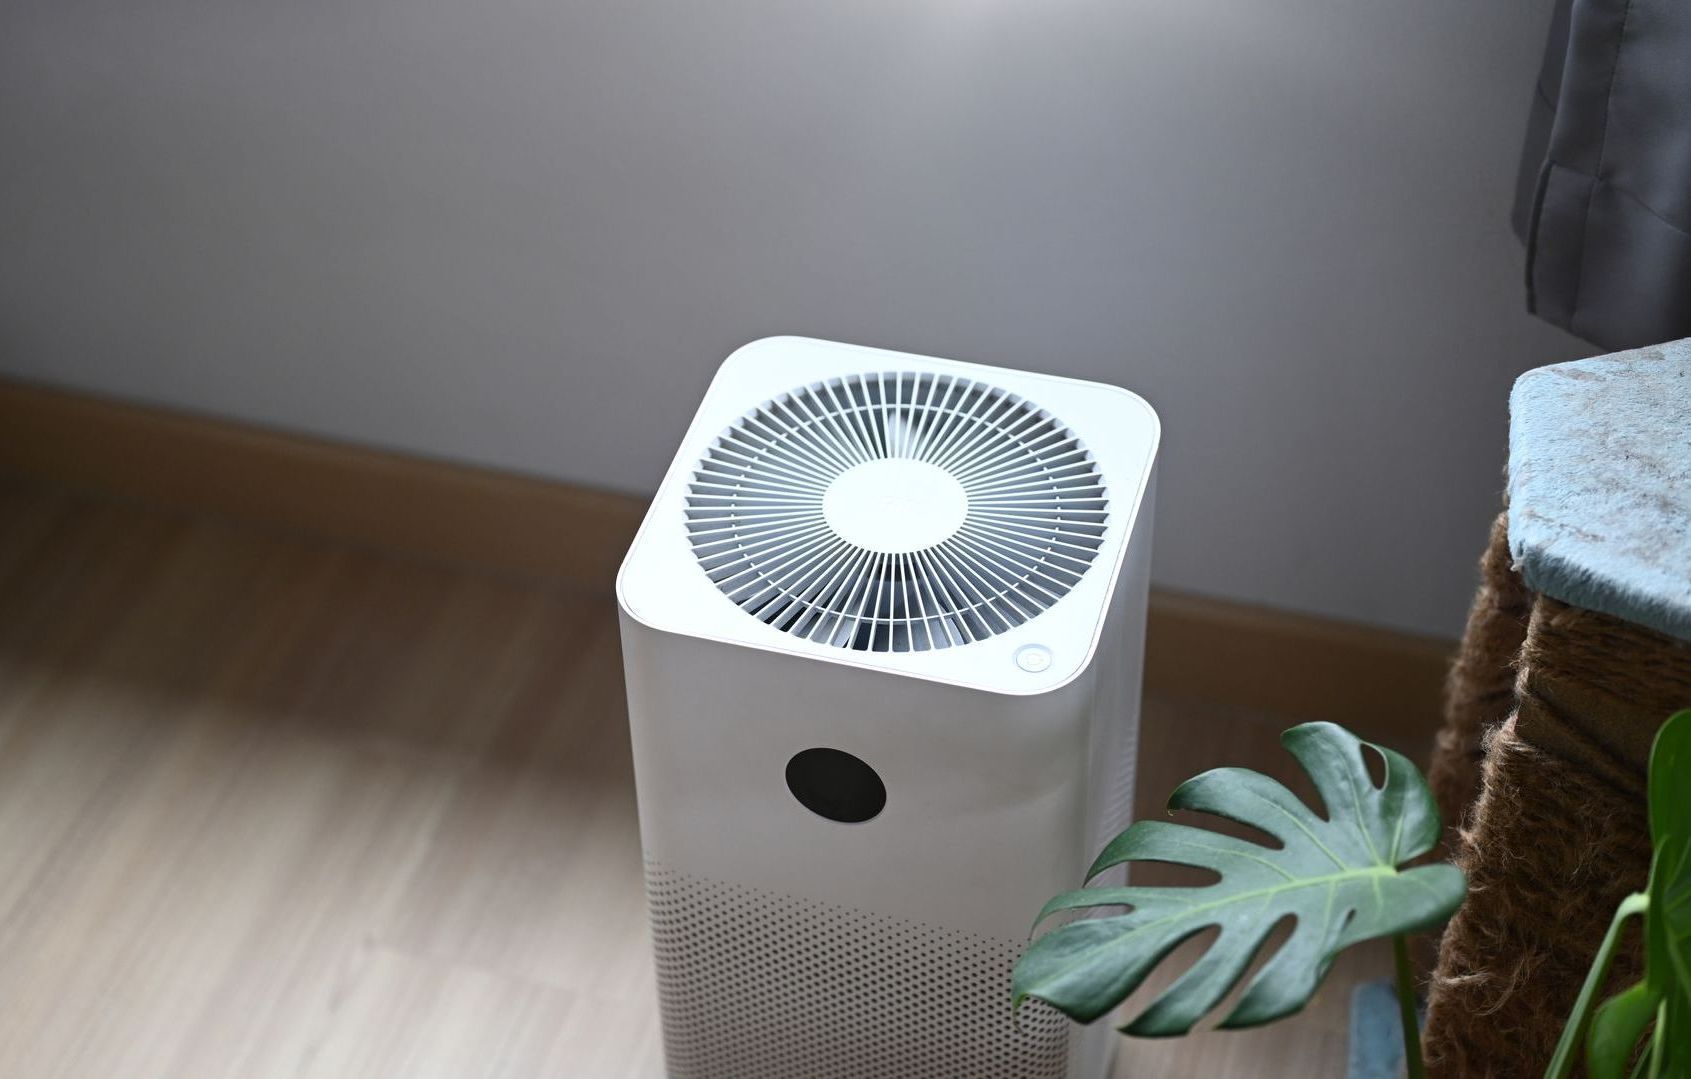 A white air purifier is sitting on a wooden floor next to a plant.